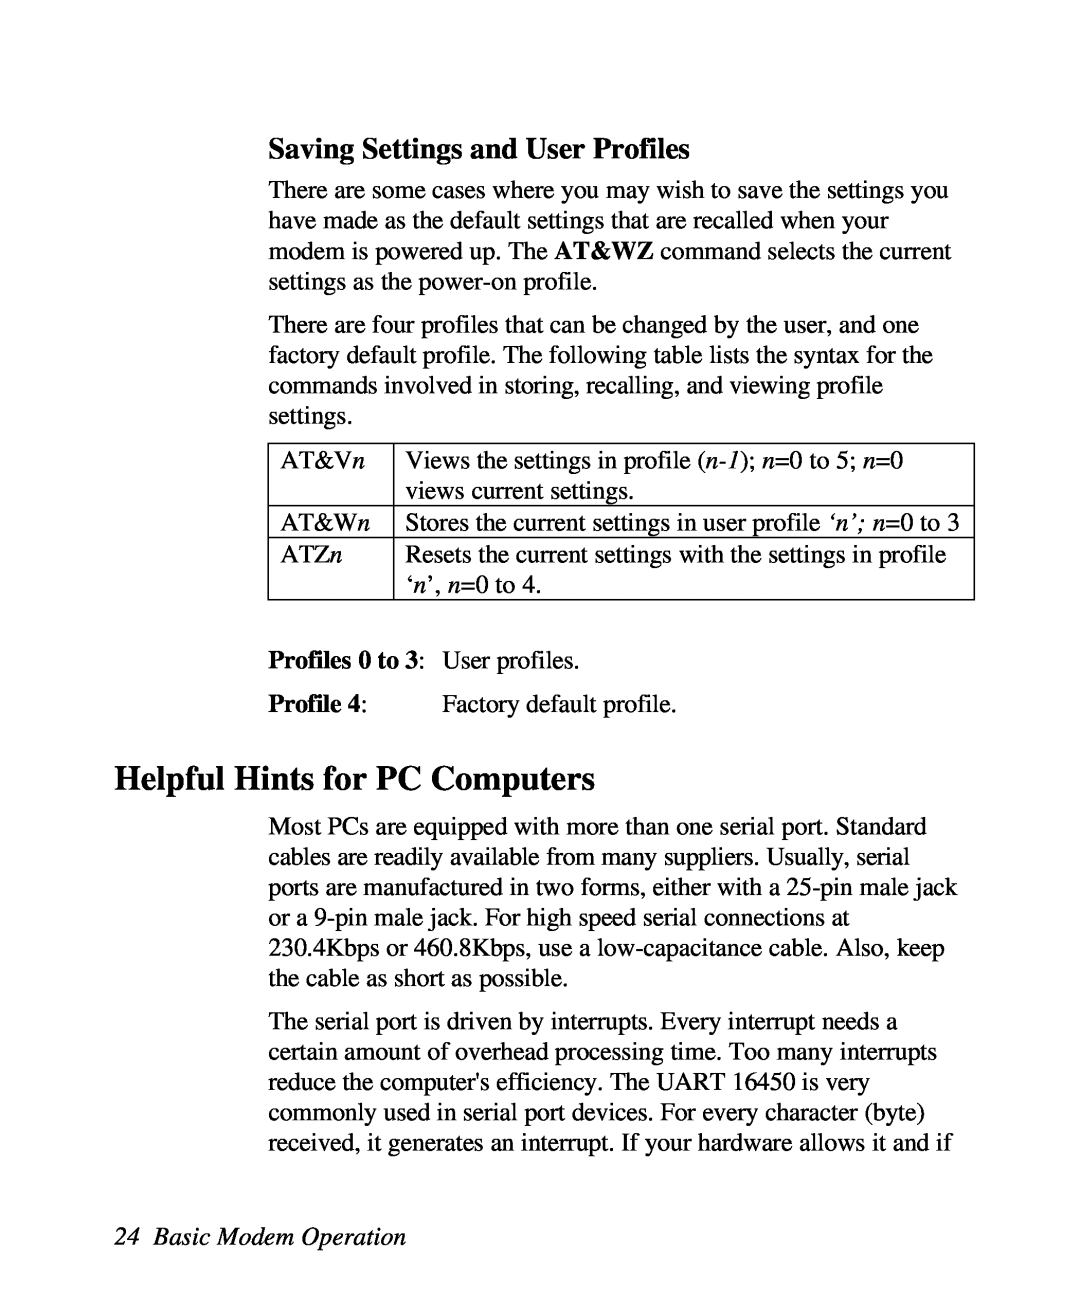 ZyXEL Communications U-336R/RE Helpful Hints for PC Computers, Saving Settings and User Profiles, Basic Modem Operation 